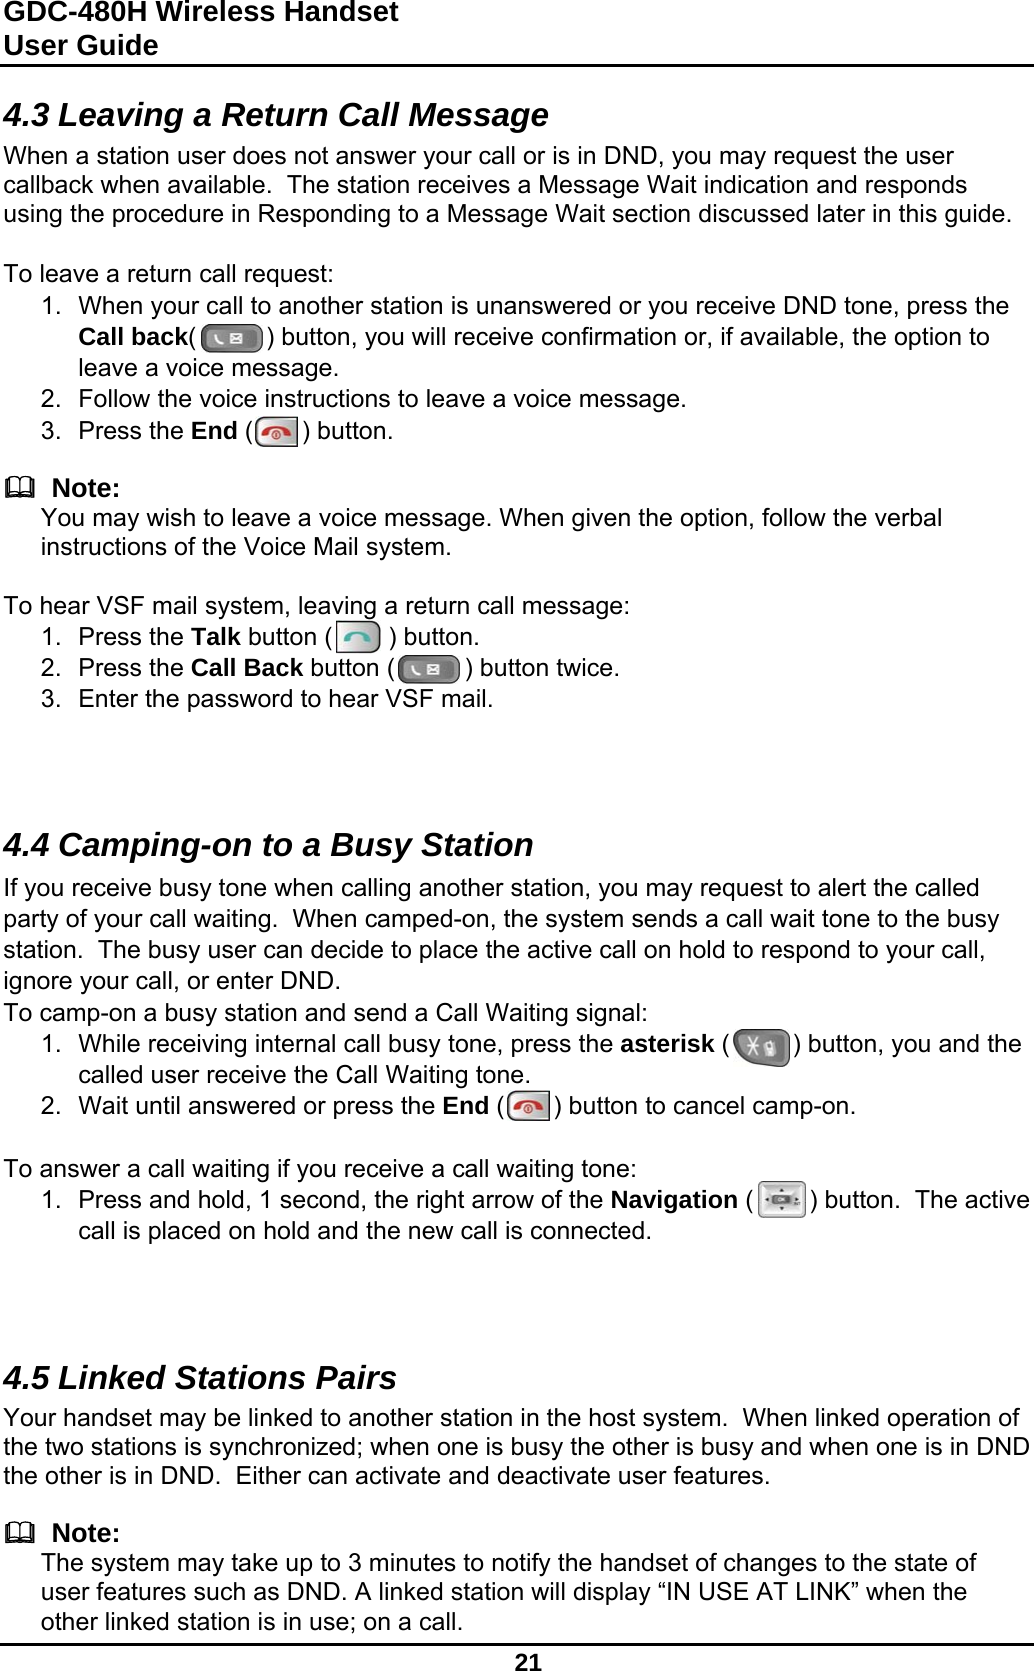 GDC-480H Wireless Handset User Guide   21  4.3 Leaving a Return Call Message When a station user does not answer your call or is in DND, you may request the user callback when available.  The station receives a Message Wait indication and responds using the procedure in Responding to a Message Wait section discussed later in this guide.  To leave a return call request: 1.  When your call to another station is unanswered or you receive DND tone, press the Call back(          ) button, you will receive confirmation or, if available, the option to leave a voice message. 2.  Follow the voice instructions to leave a voice message. 3. Press the End (       ) button.    Note: You may wish to leave a voice message. When given the option, follow the verbal instructions of the Voice Mail system.   To hear VSF mail system, leaving a return call message: 1. Press the Talk button (        ) button. 2. Press the Call Back button (          ) button twice. 3.  Enter the password to hear VSF mail.    4.4 Camping-on to a Busy Station If you receive busy tone when calling another station, you may request to alert the called party of your call waiting.  When camped-on, the system sends a call wait tone to the busy station.  The busy user can decide to place the active call on hold to respond to your call, ignore your call, or enter DND. To camp-on a busy station and send a Call Waiting signal: 1.  While receiving internal call busy tone, press the asterisk (         ) button, you and the called user receive the Call Waiting tone. 2.  Wait until answered or press the End (       ) button to cancel camp-on.  To answer a call waiting if you receive a call waiting tone: 1.  Press and hold, 1 second, the right arrow of the Navigation (        ) button.  The active call is placed on hold and the new call is connected.    4.5 Linked Stations Pairs Your handset may be linked to another station in the host system.  When linked operation of the two stations is synchronized; when one is busy the other is busy and when one is in DND the other is in DND.  Either can activate and deactivate user features.    Note: The system may take up to 3 minutes to notify the handset of changes to the state of user features such as DND. A linked station will display “IN USE AT LINK” when the other linked station is in use; on a call.  